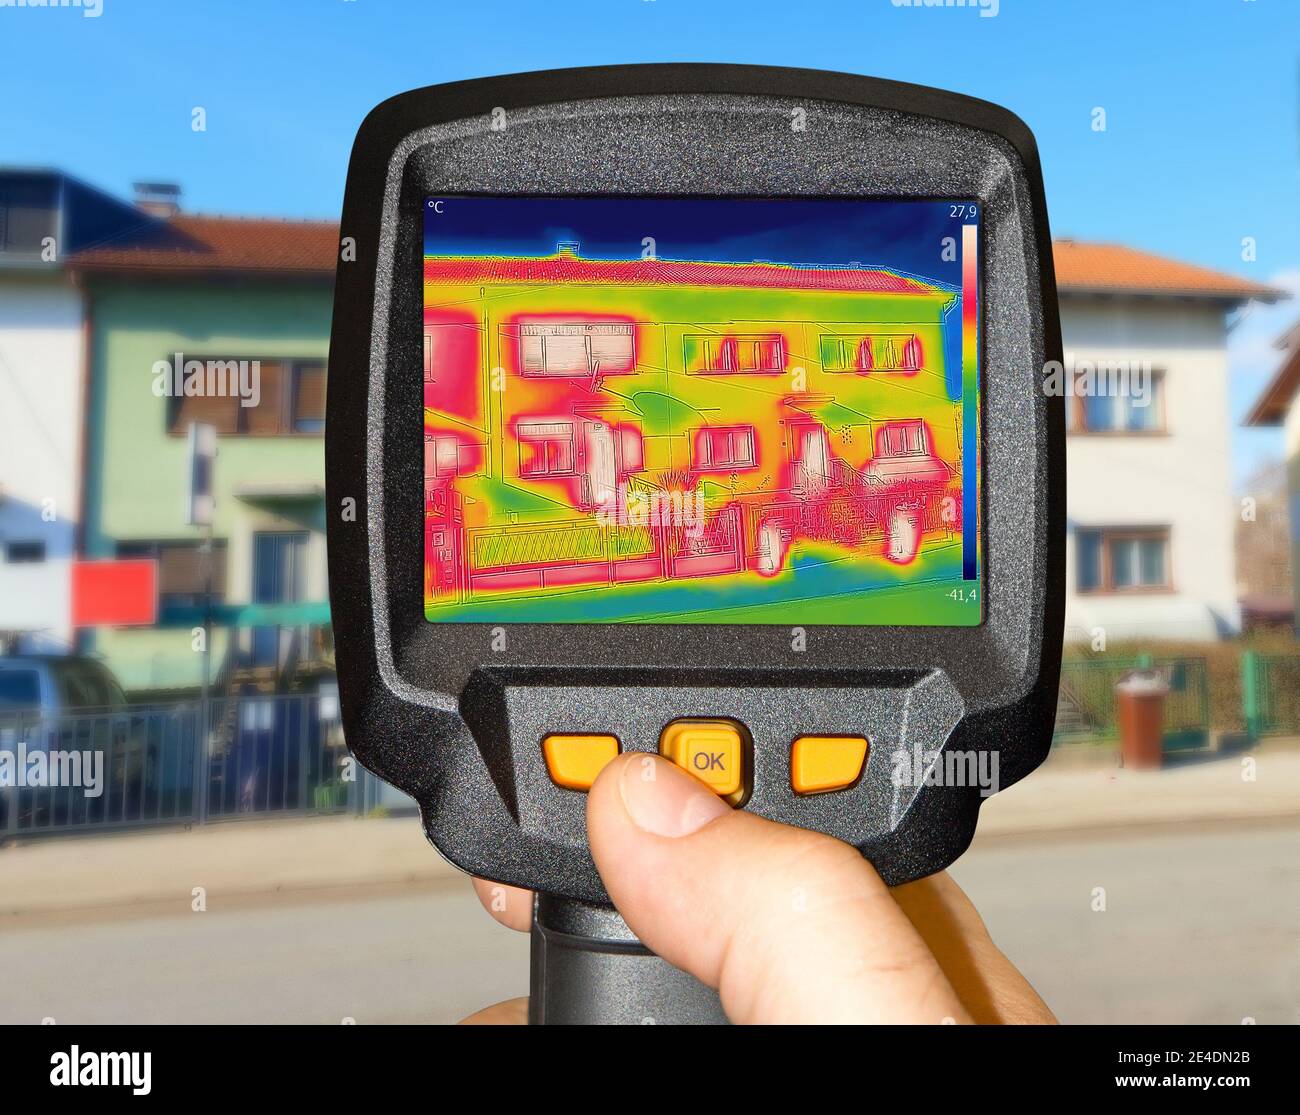 Recording Heat Loss at the family house, With Thermal Camera Stock Photo